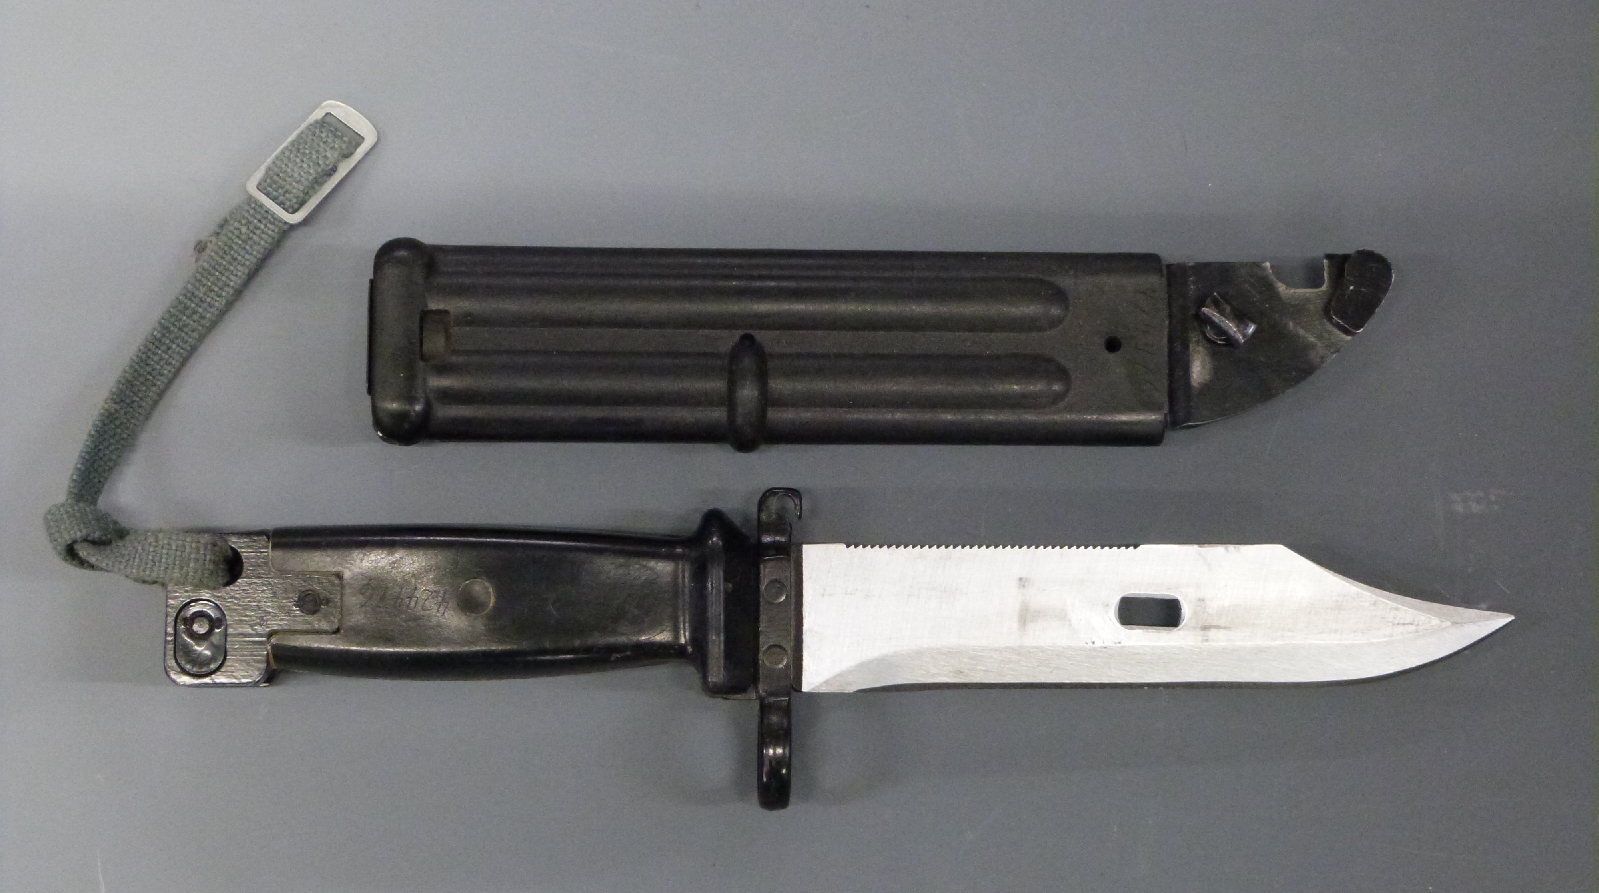 AK47 bayonet with 14.5cm serrated blade and wire cutting scabbard.